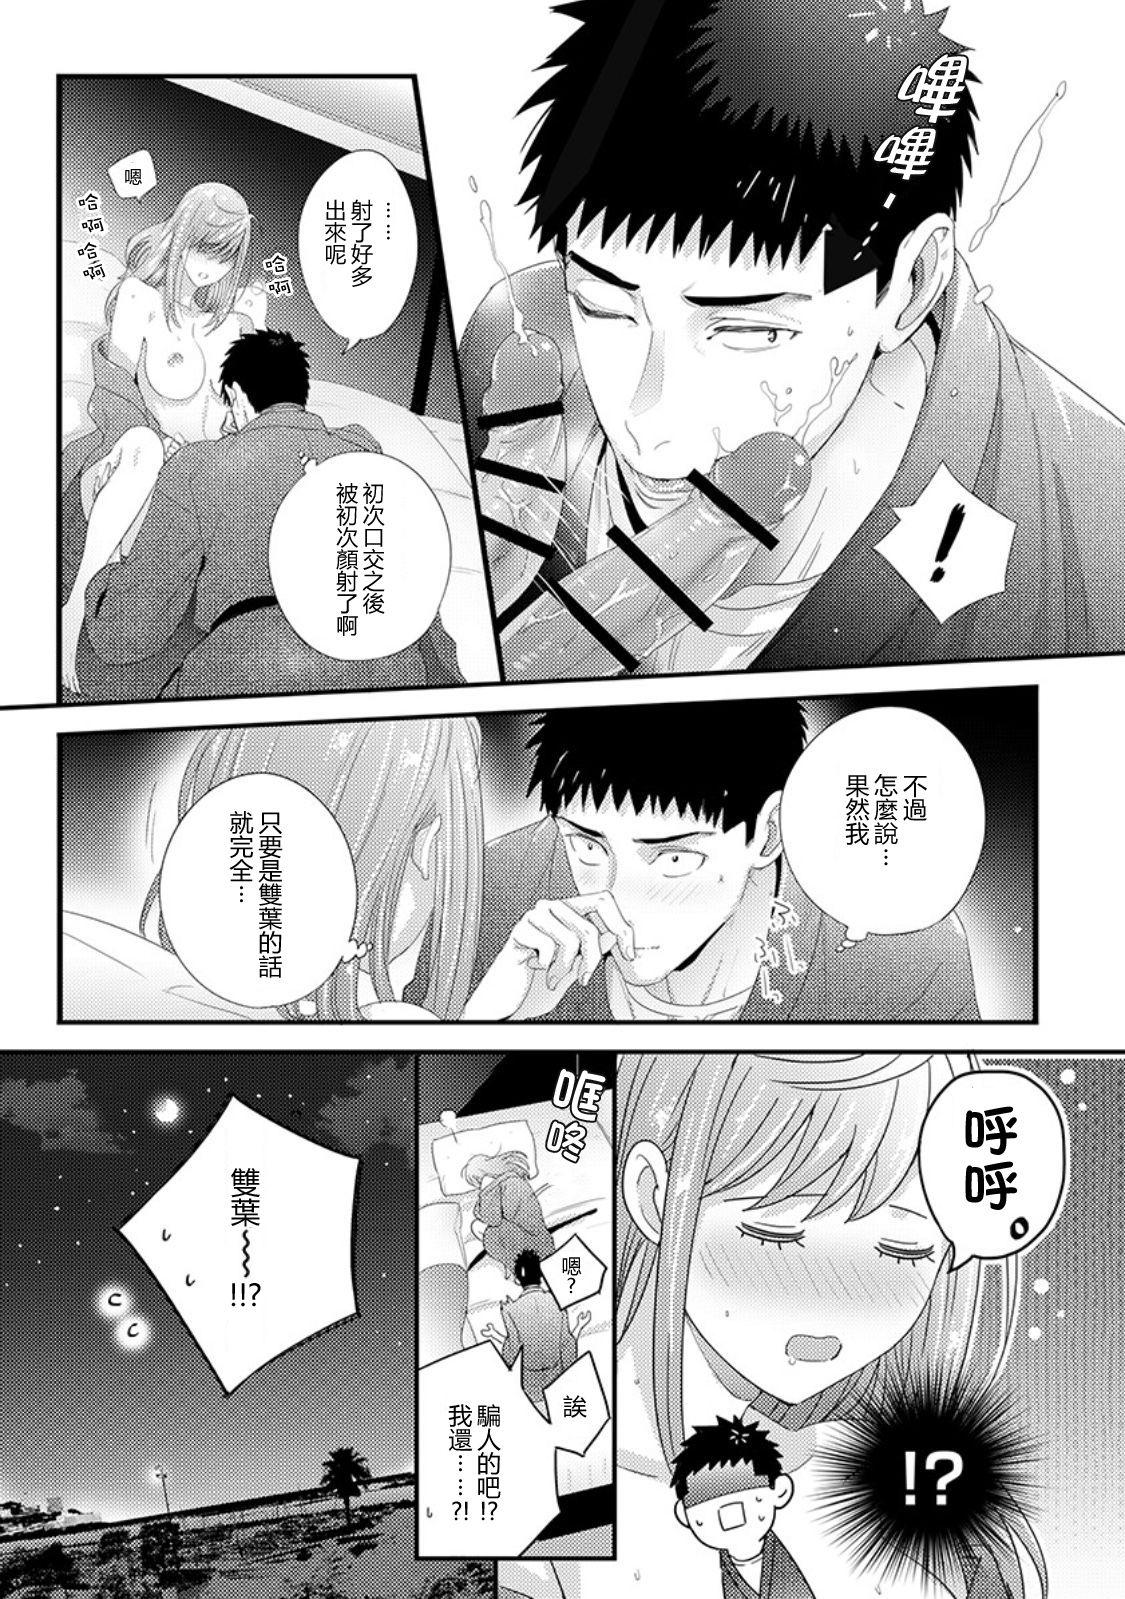 Please Let Me Hold You Futaba-San! Ch.1 21